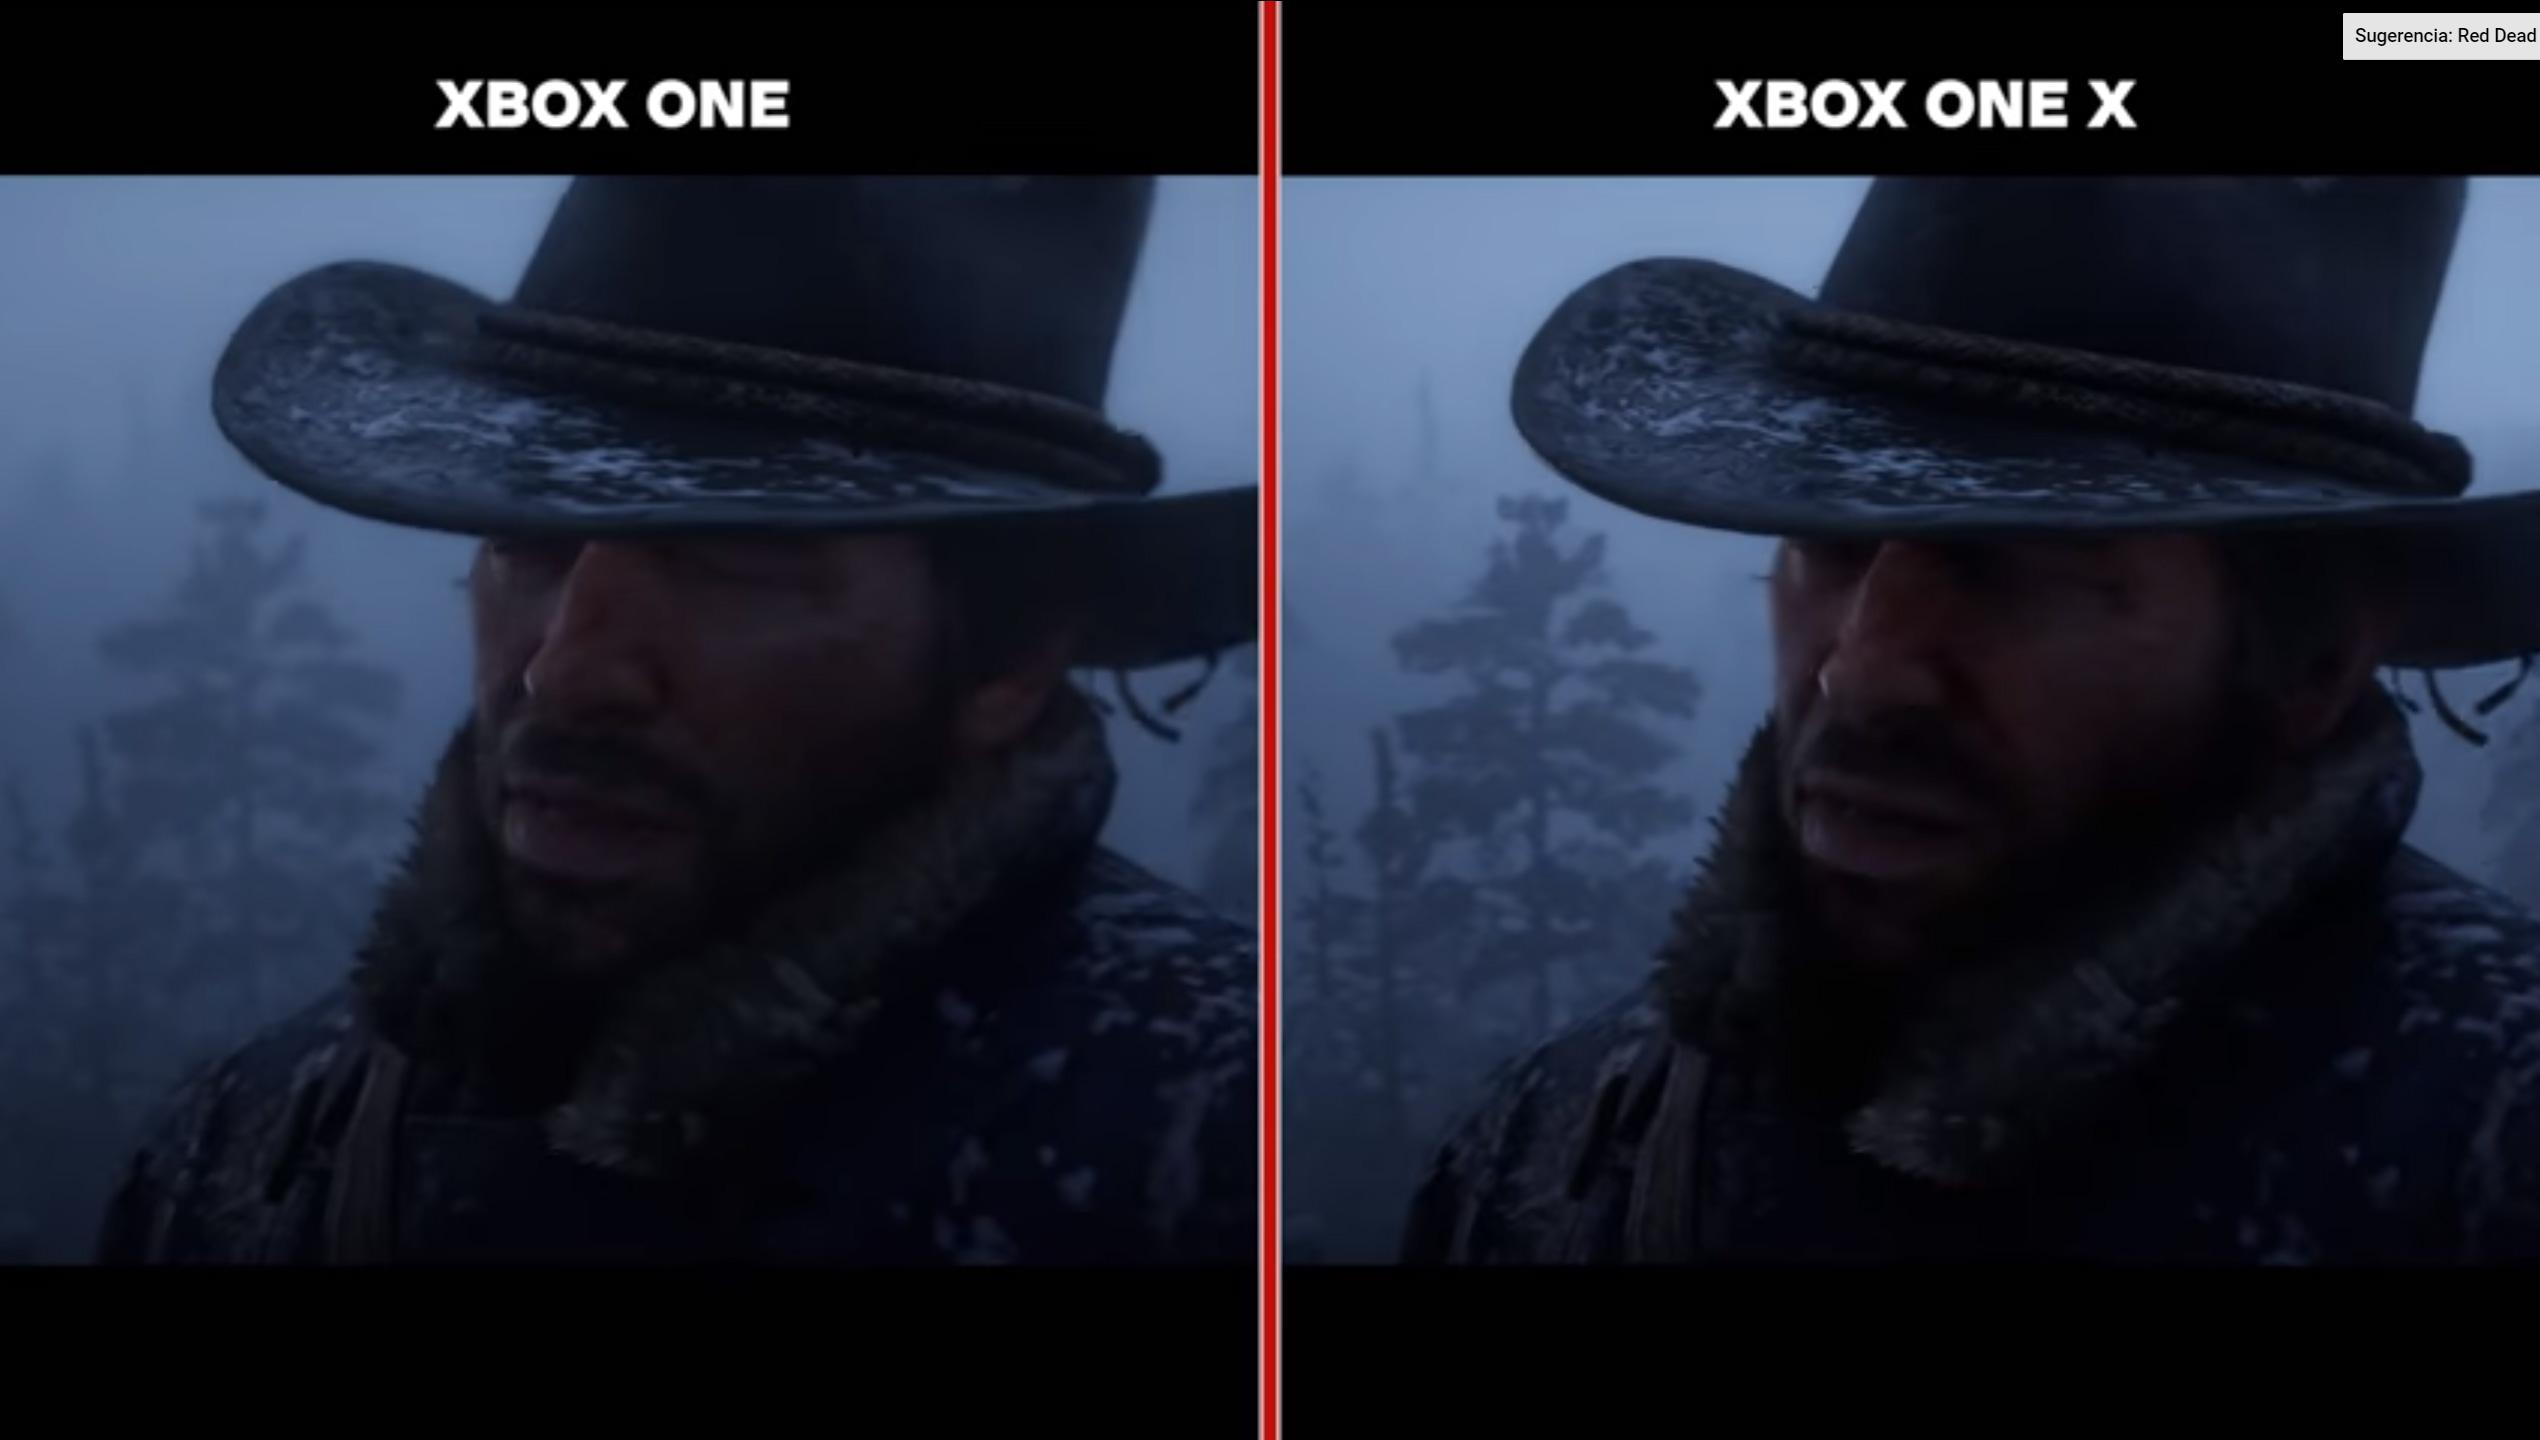 Red Dead Redemption 2: Pro vs X